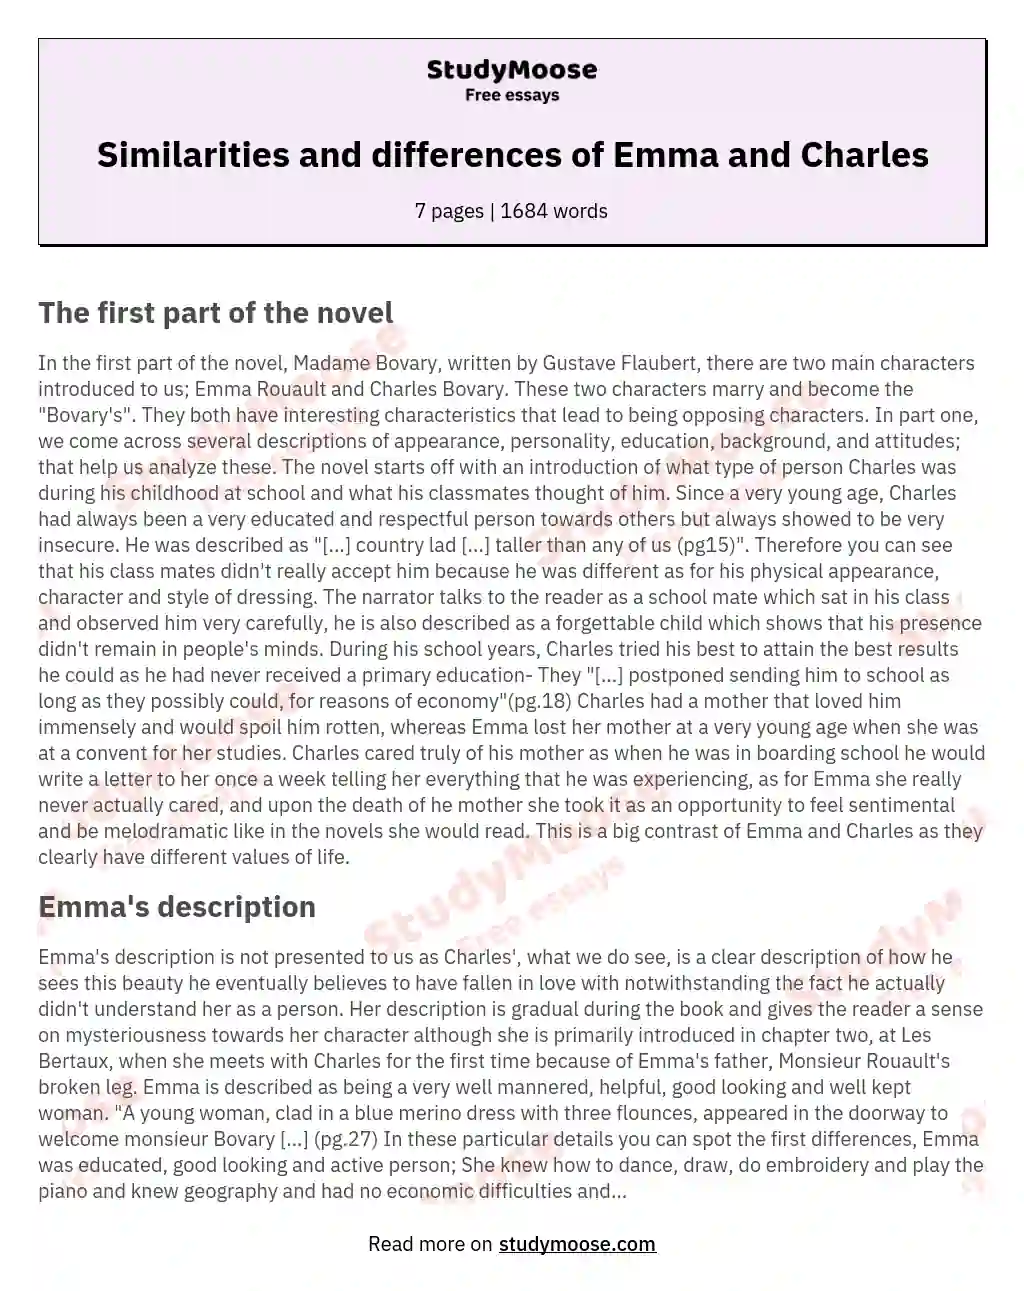 Similarities and differences of Emma and Charles